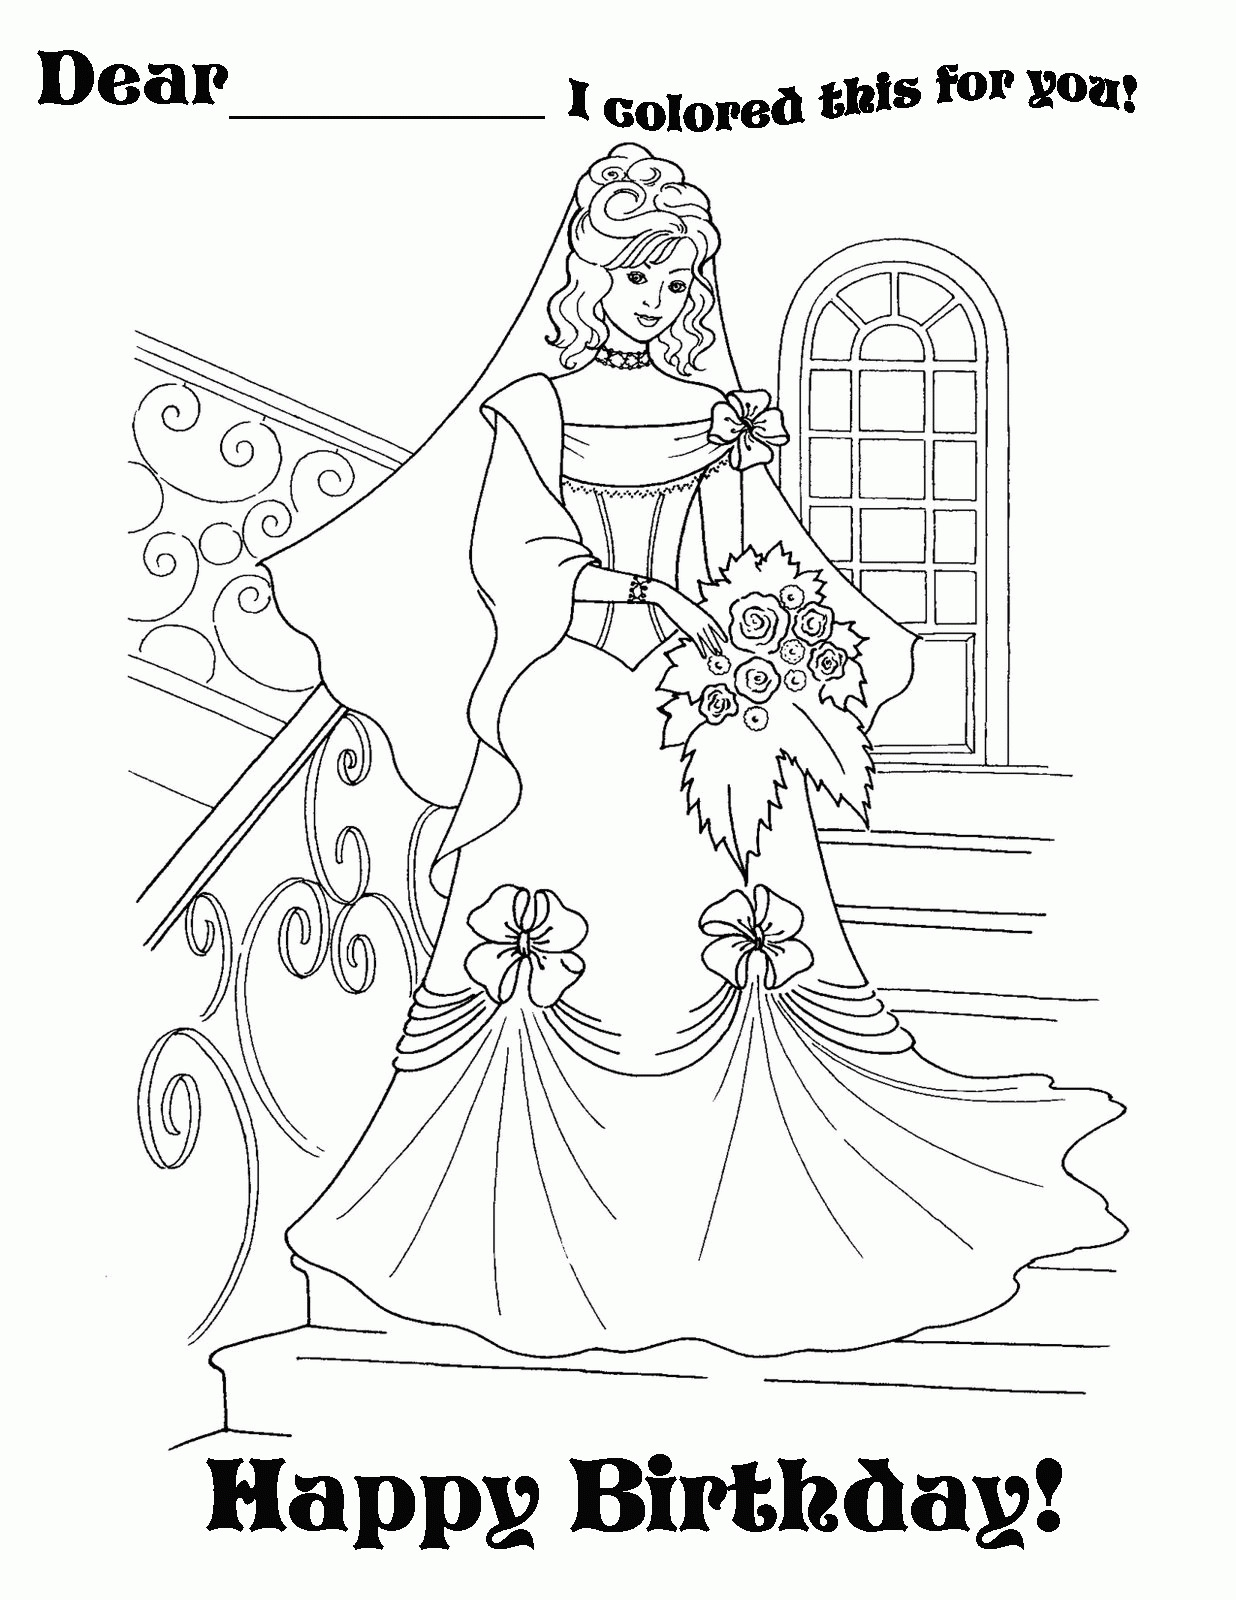 All Disney Princess Coloring Pages Happy Birthday   Coloring Pages ...